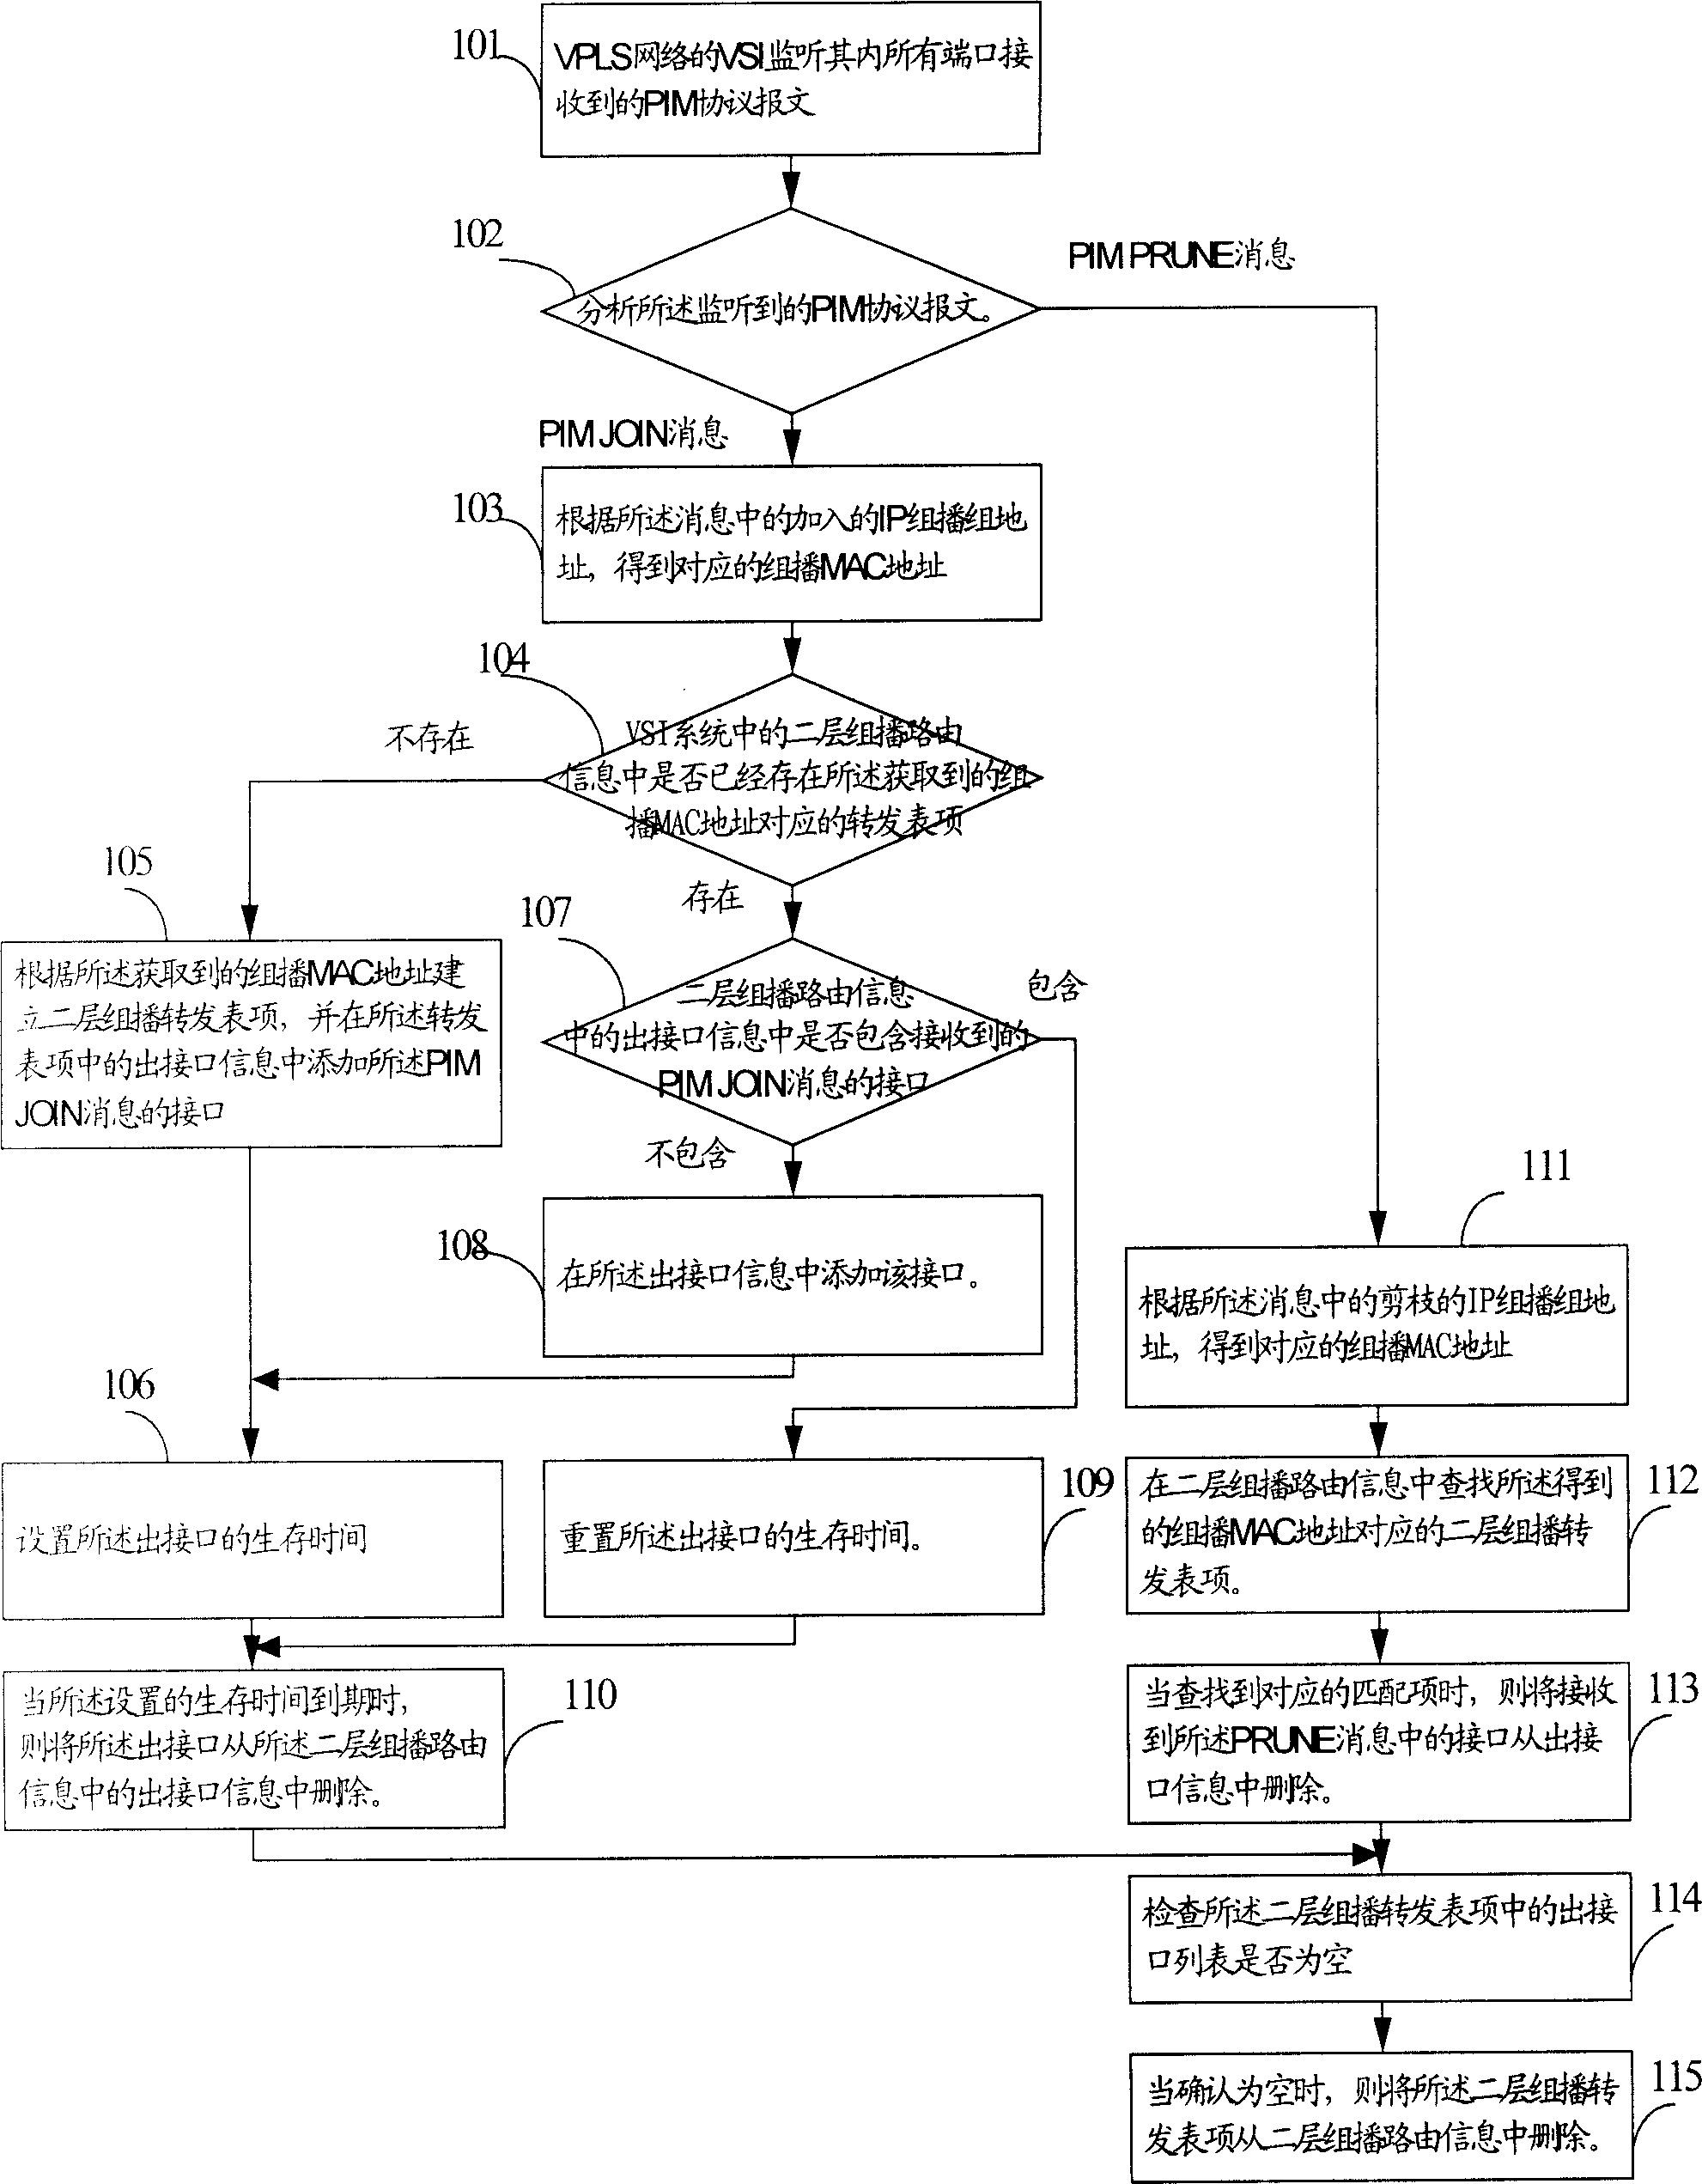 Method for implementing multicast data stream retransmission in virtual special LAN service